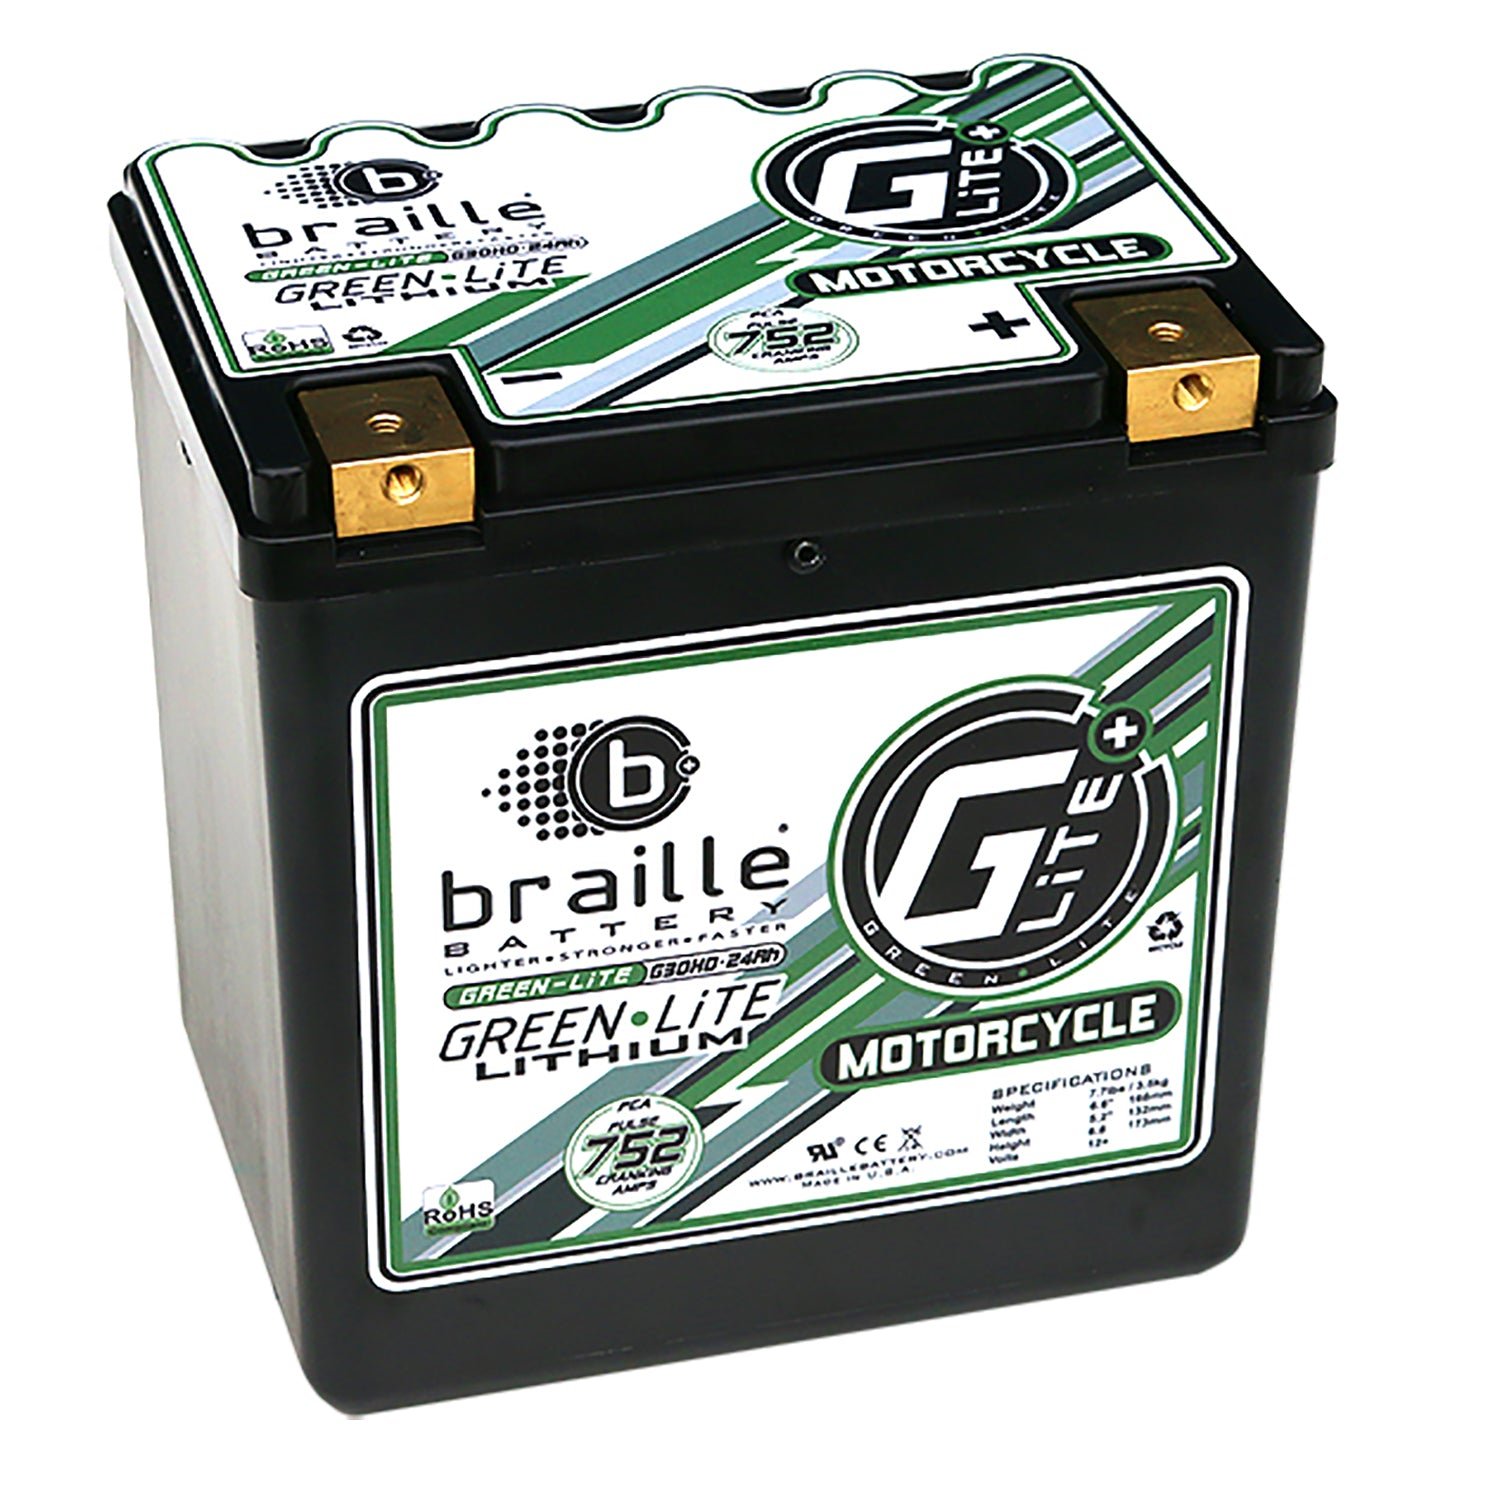 Green-Lite Lithium-Ion 12 V Motorcycle Battery